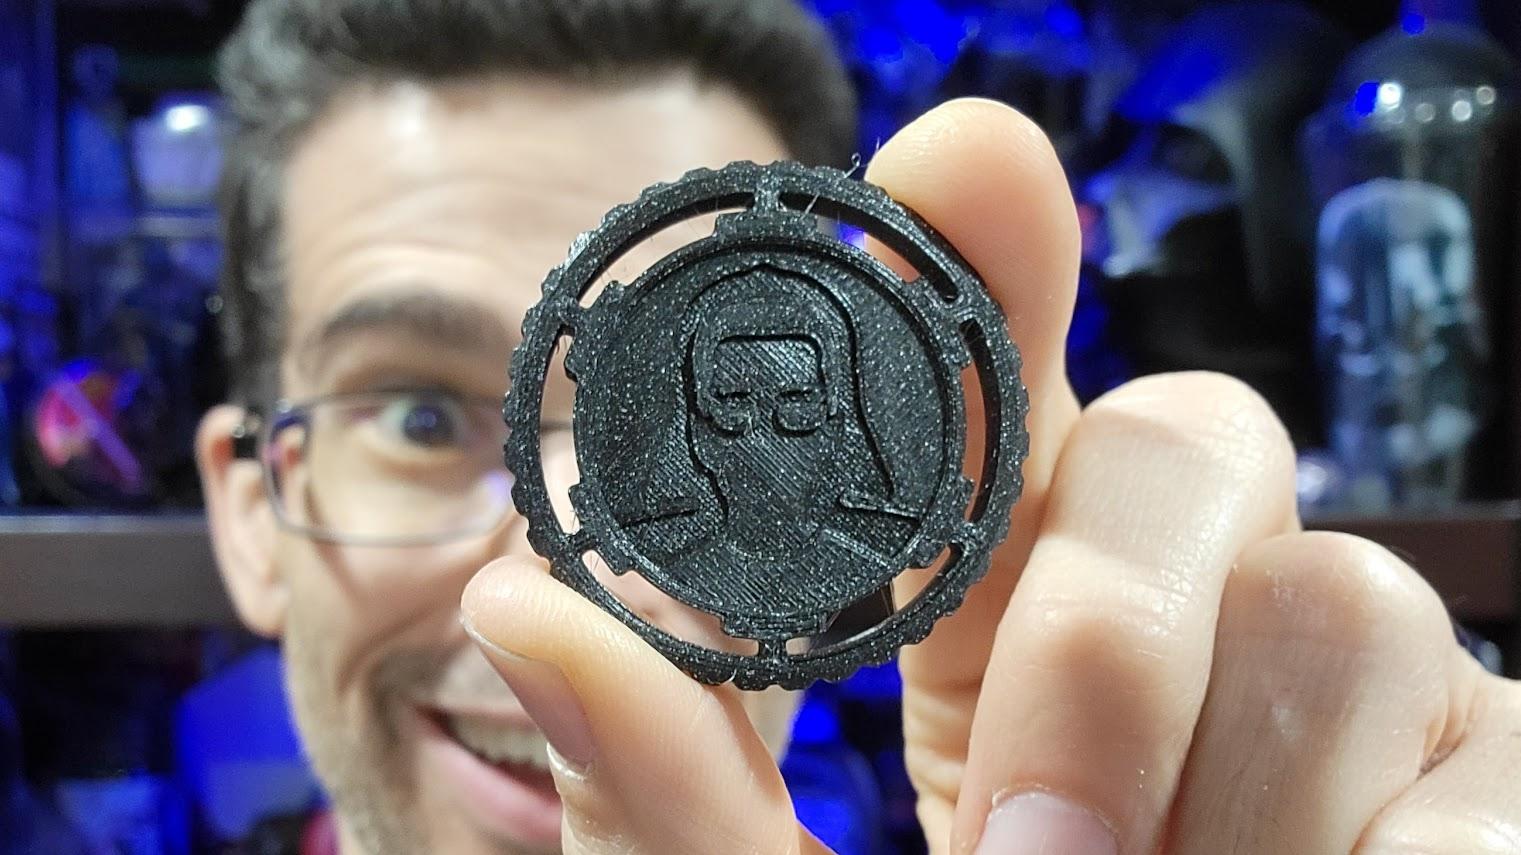 Chris Pirillo's Darth Vader Empire Star Wars Inspired Creator (Maker) Coin Collection - It's me holding a me coin! - 3d model